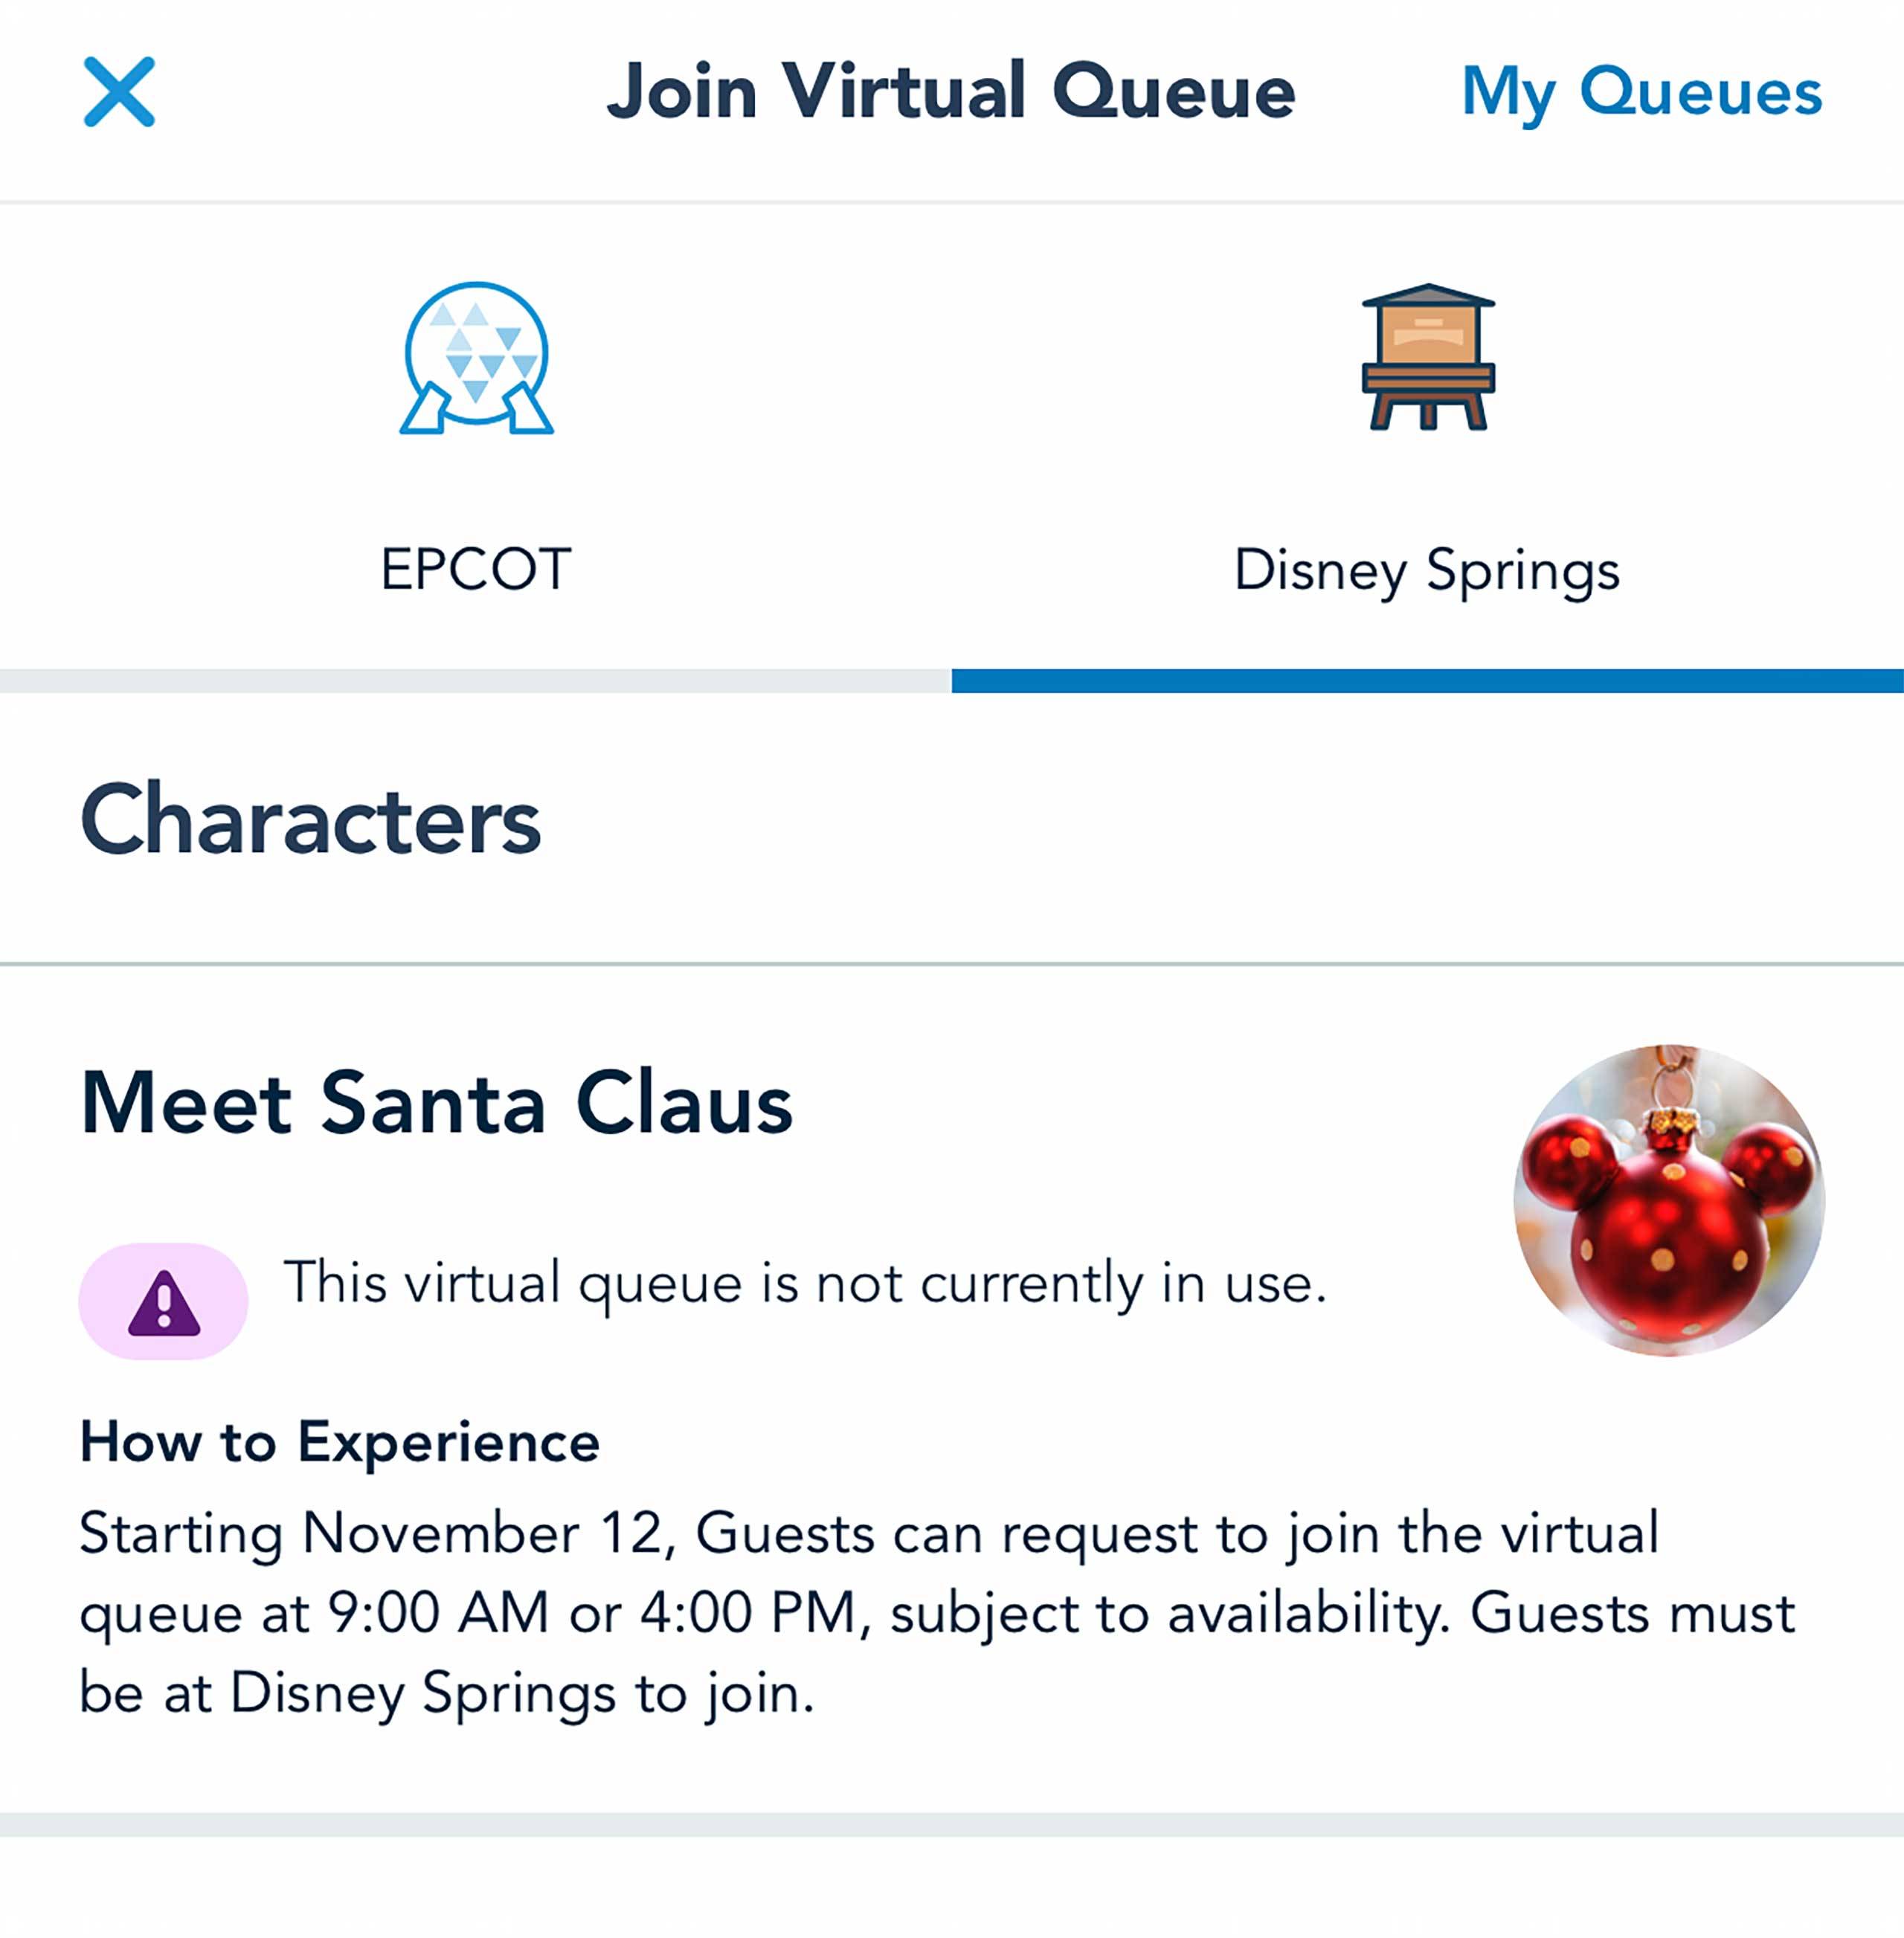 Meeting Santa at Disney Springs will require a virtual queue reservation in My Disney Experience this year